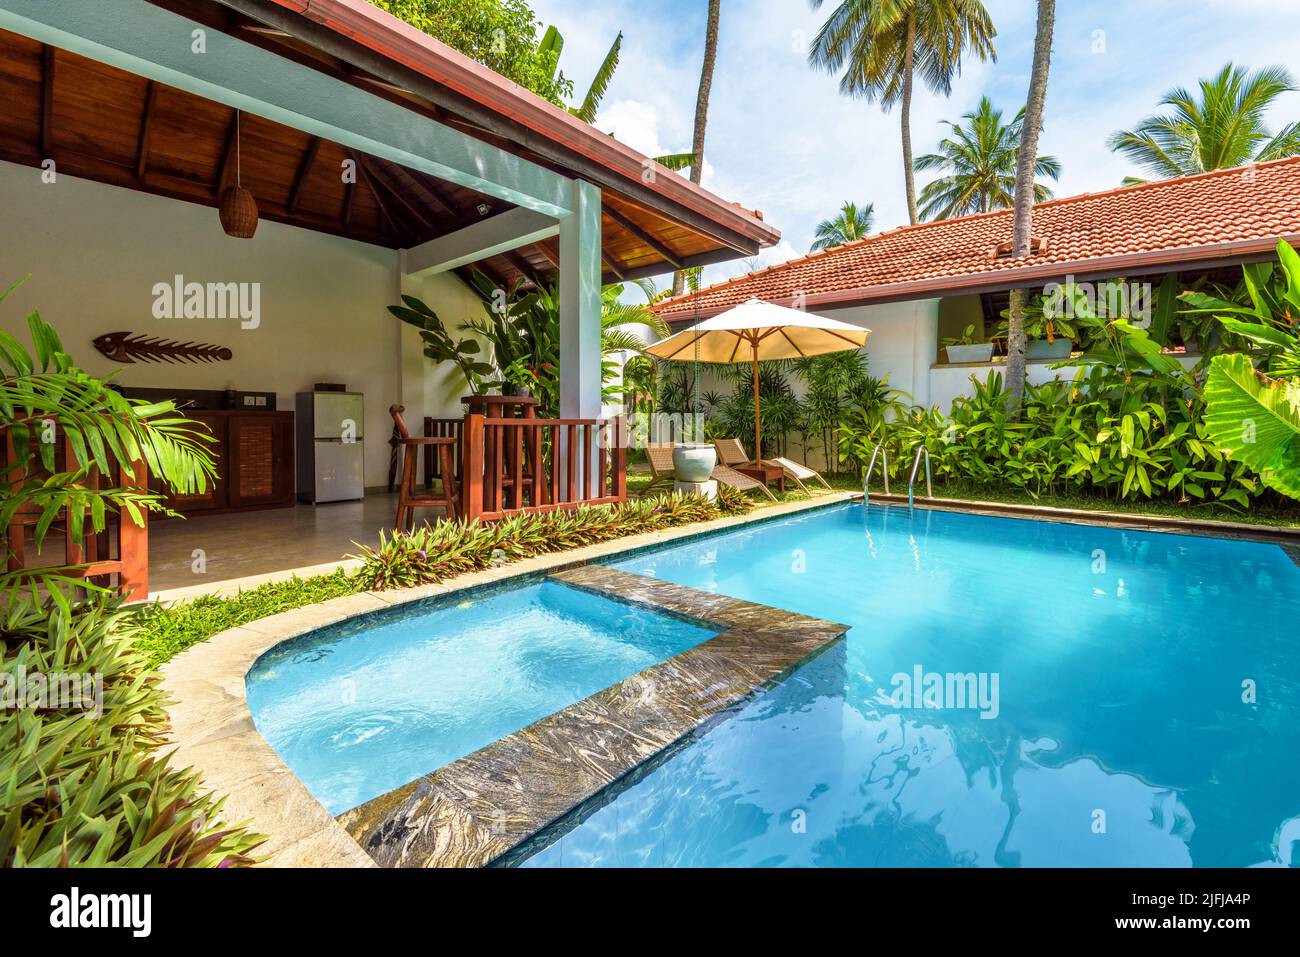 Sri Lanka - Nov 4, 2017: Luxury home with pool and terrace in backyard. Bungalow in Indian or Caribbean style and garden in courtyard. Nice villa on t Stock Photo